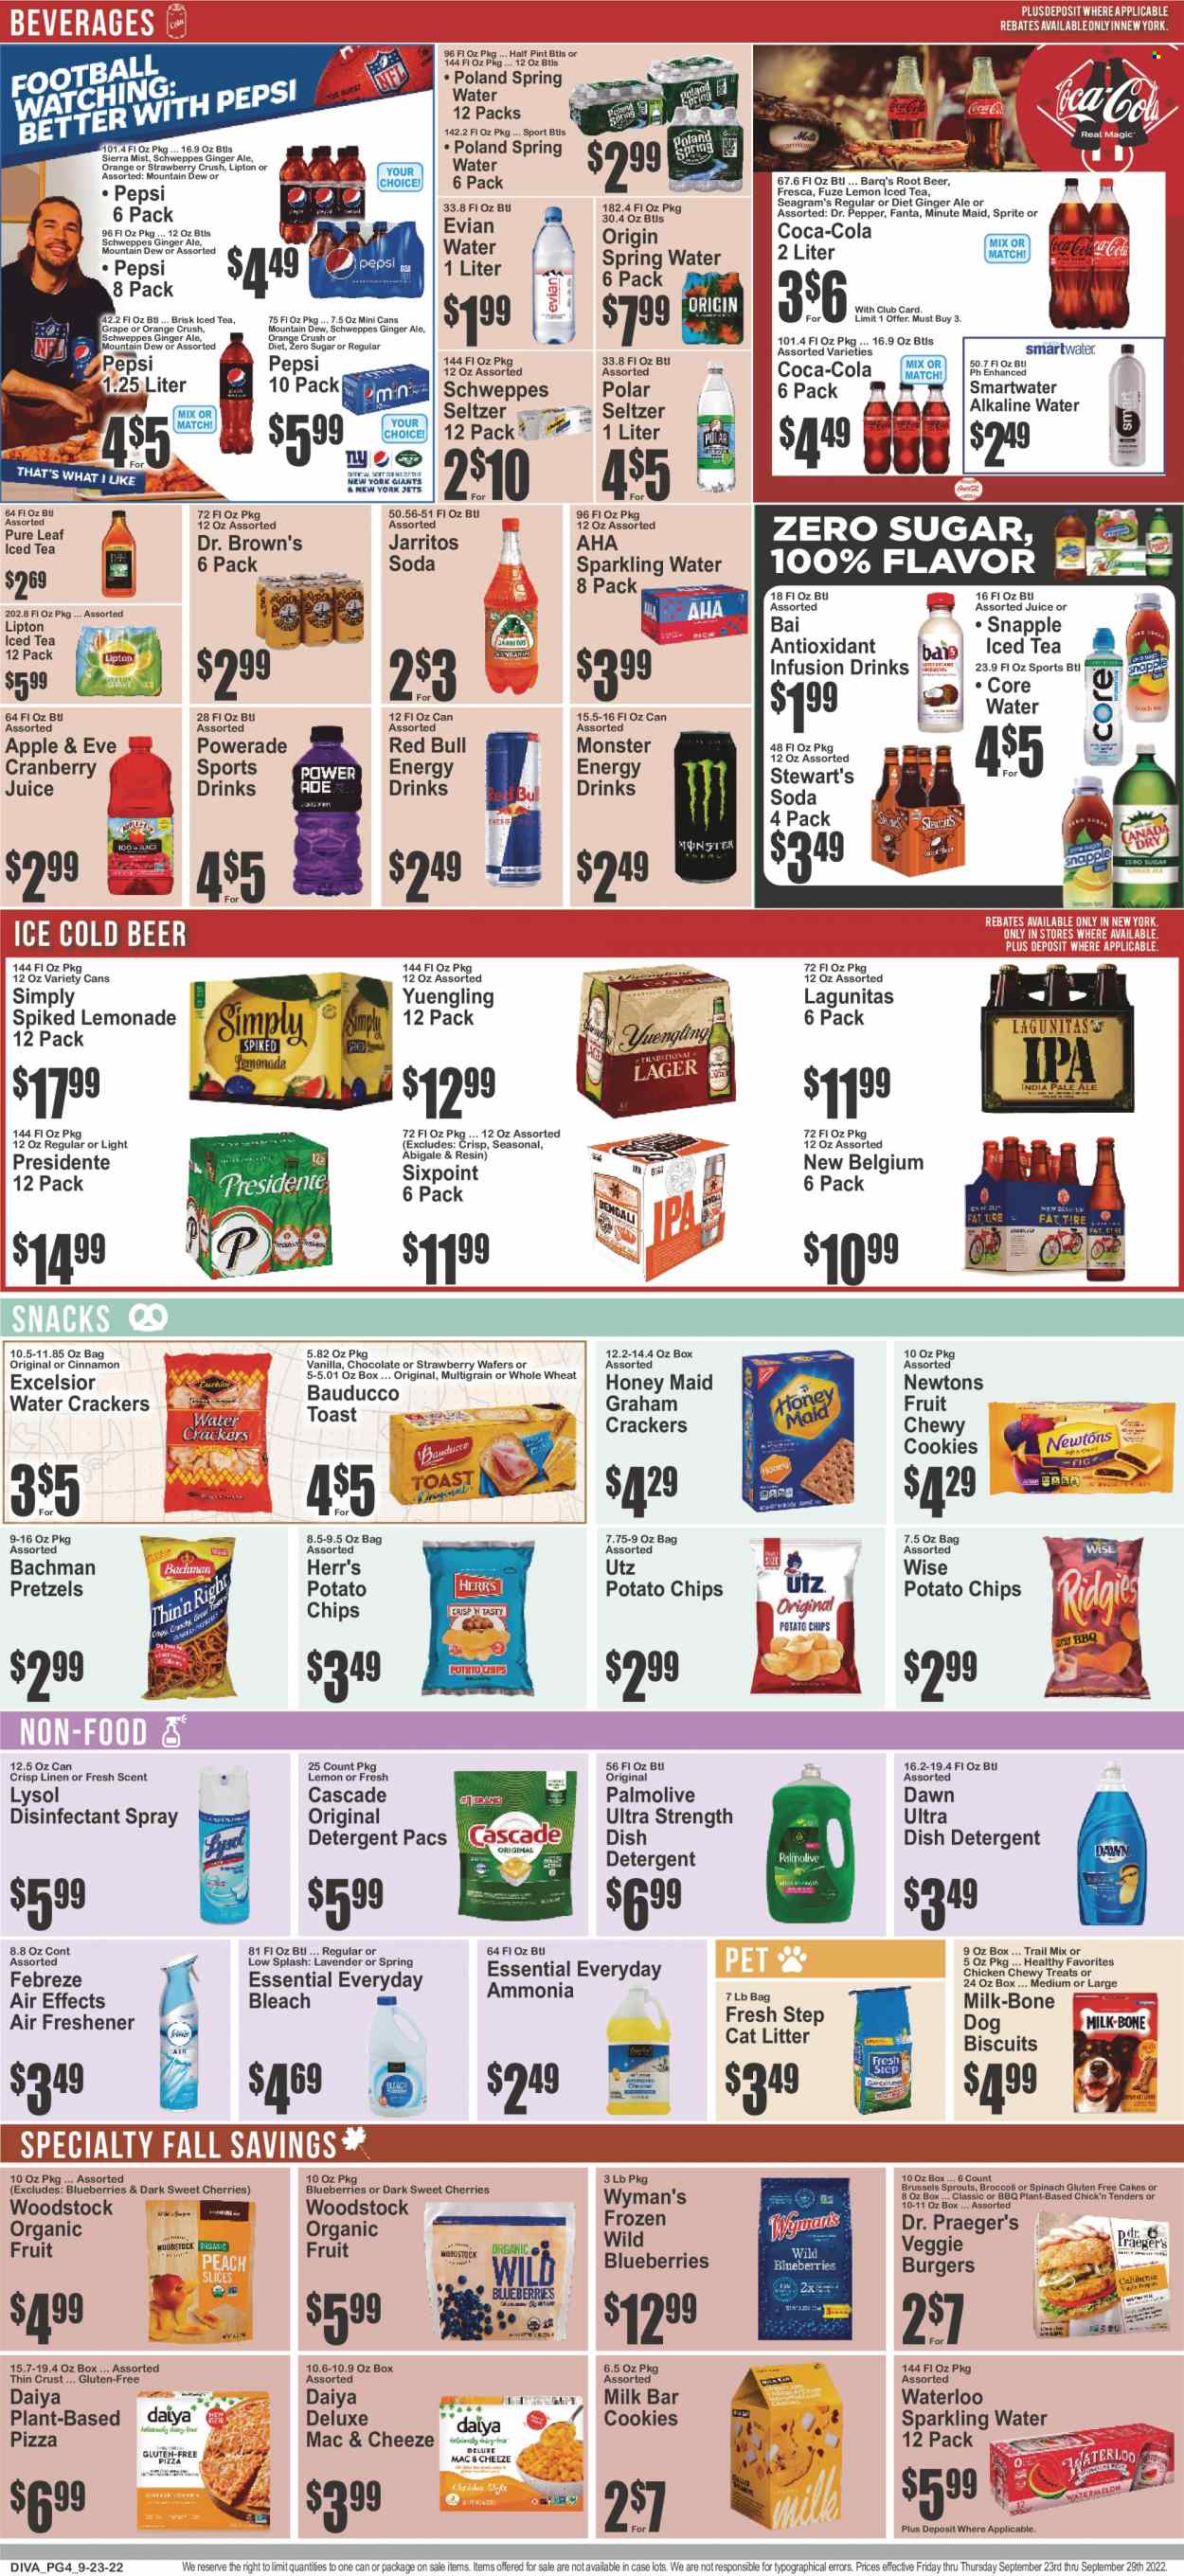 thumbnail - Brooklyn Fare Flyer - 09/23/2022 - 09/29/2022 - Sales products - pretzels, cake, broccoli, brussel sprouts, blueberries, oranges, pizza, veggie burger, cookies, graham crackers, wafers, chocolate, snack, crackers, Milkybar, potato chips, Honey Maid, cinnamon, trail mix, Coca-Cola, cranberry juice, ginger ale, lemonade, Mountain Dew, Schweppes, Sprite, Powerade, Pepsi, juice, Fanta, energy drink, Monster, Lipton, ice tea, Dr. Pepper, Red Bull, Monster Energy, Snapple, Dr. Brown's, Sierra Mist, Bai, fruit punch, seltzer water, soda, sparkling water, Smartwater, alkaline water, Evian, Pure Leaf, beer, detergent, Febreze, bleach, desinfection, Lysol, Cascade, dishwasher cleaner, Palmolive, antibacterial spray, air freshener, cat litter, animal treats, dog food, dog biscuits, Fresh Step, Yuengling. Page 4.